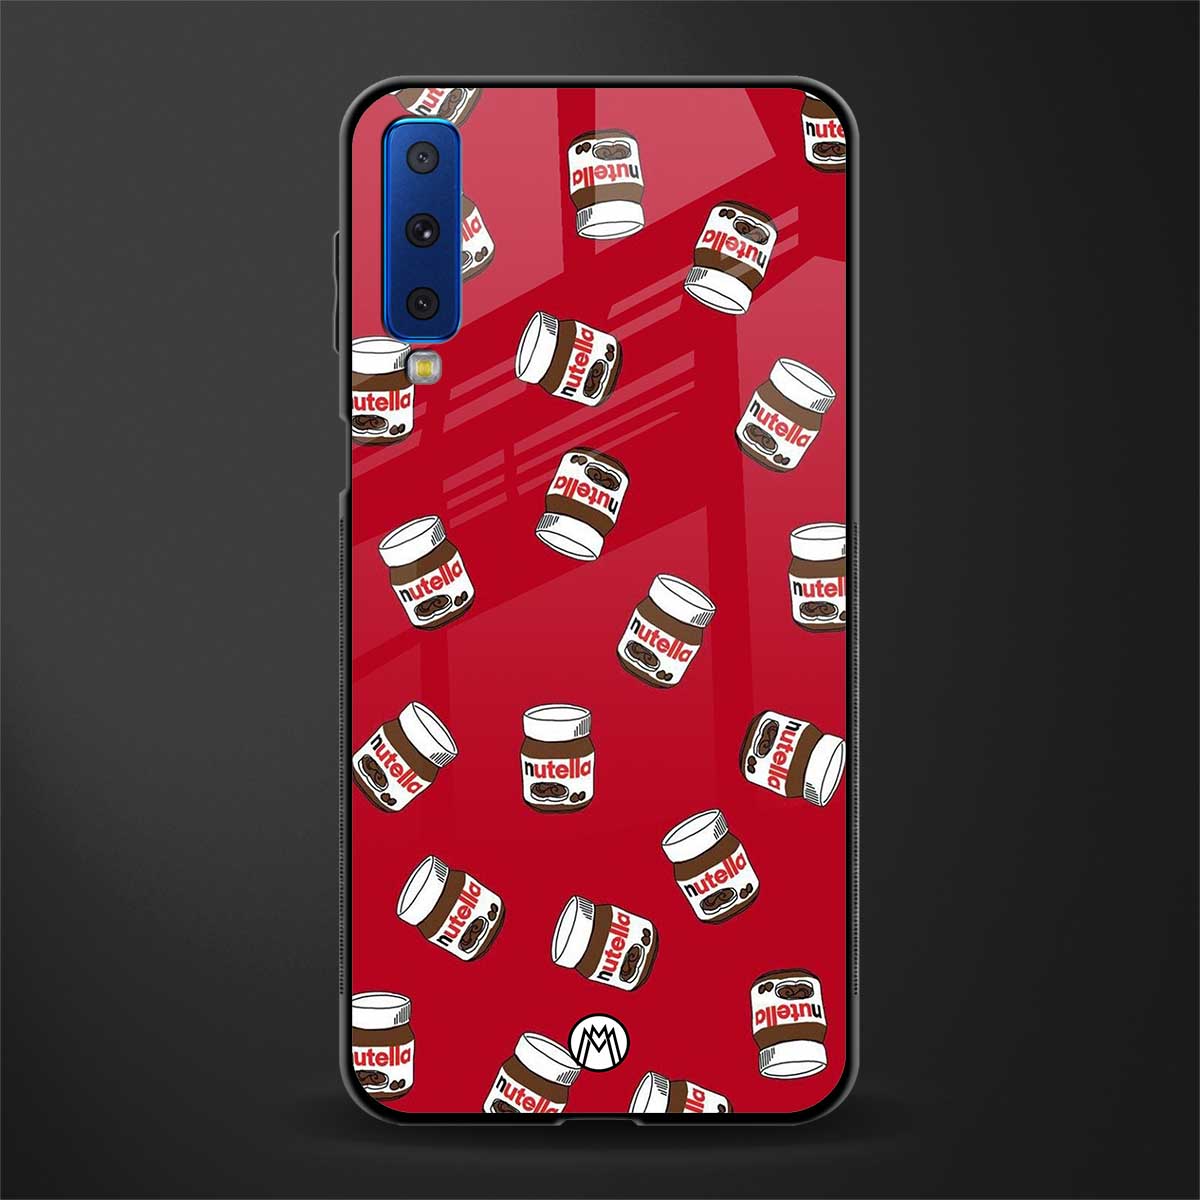 red nutella glass case for samsung galaxy a7 2018 image